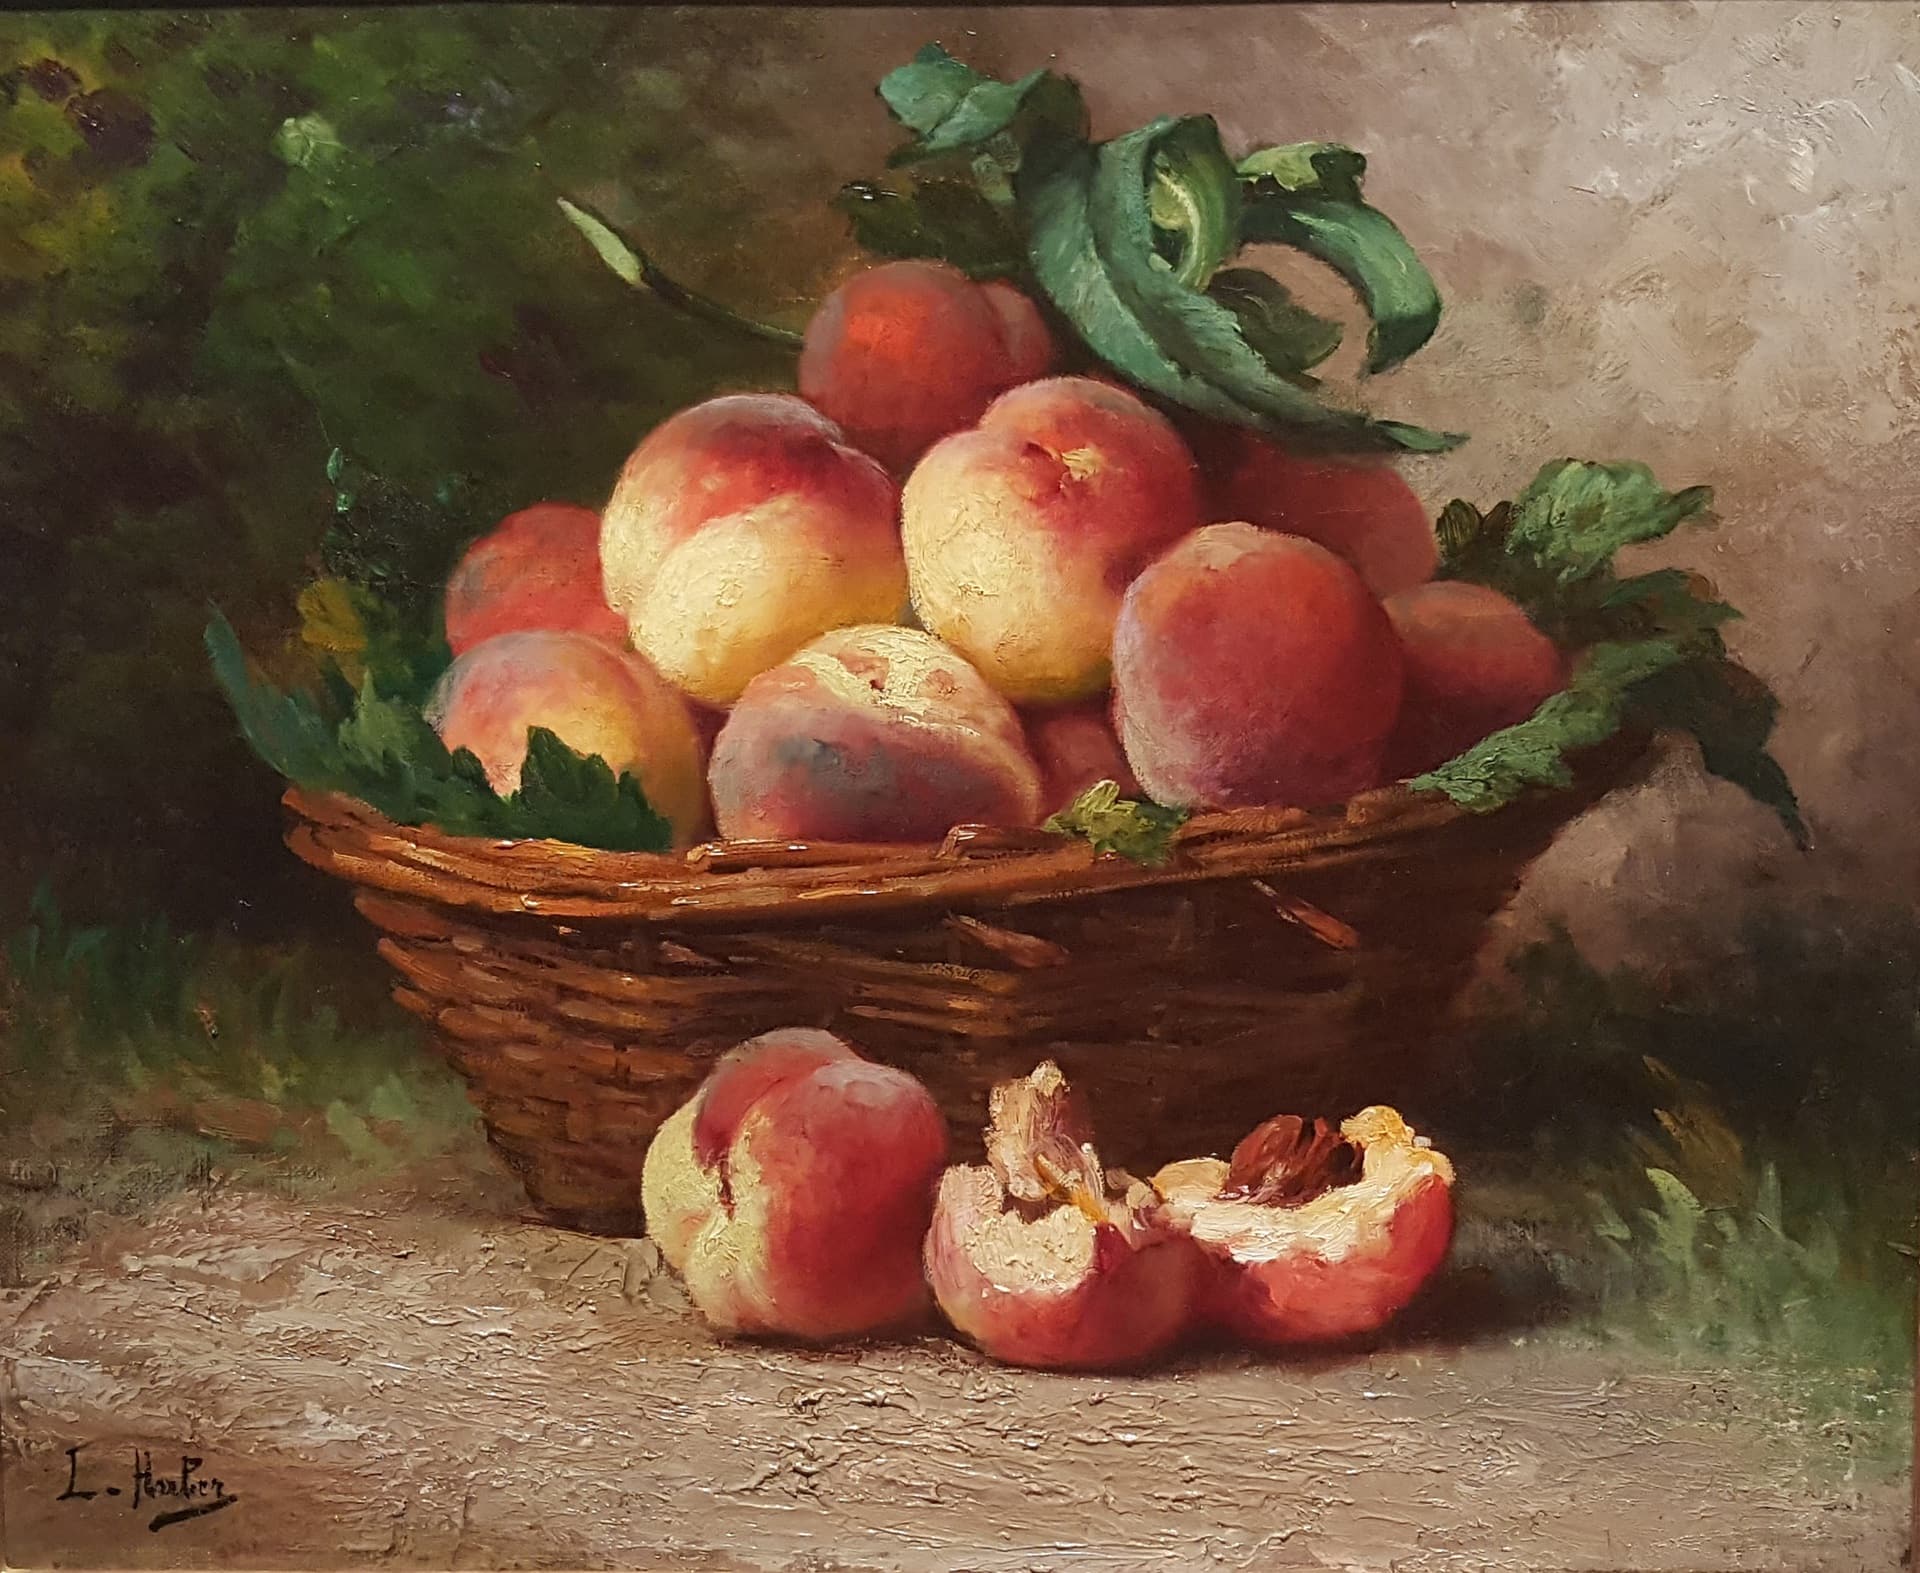 Leon Huber's Still Life of Peaches. A woven basket full of peaches and vegetation, on the earth. One peach, outside the basket, is split, showing the peach pit.